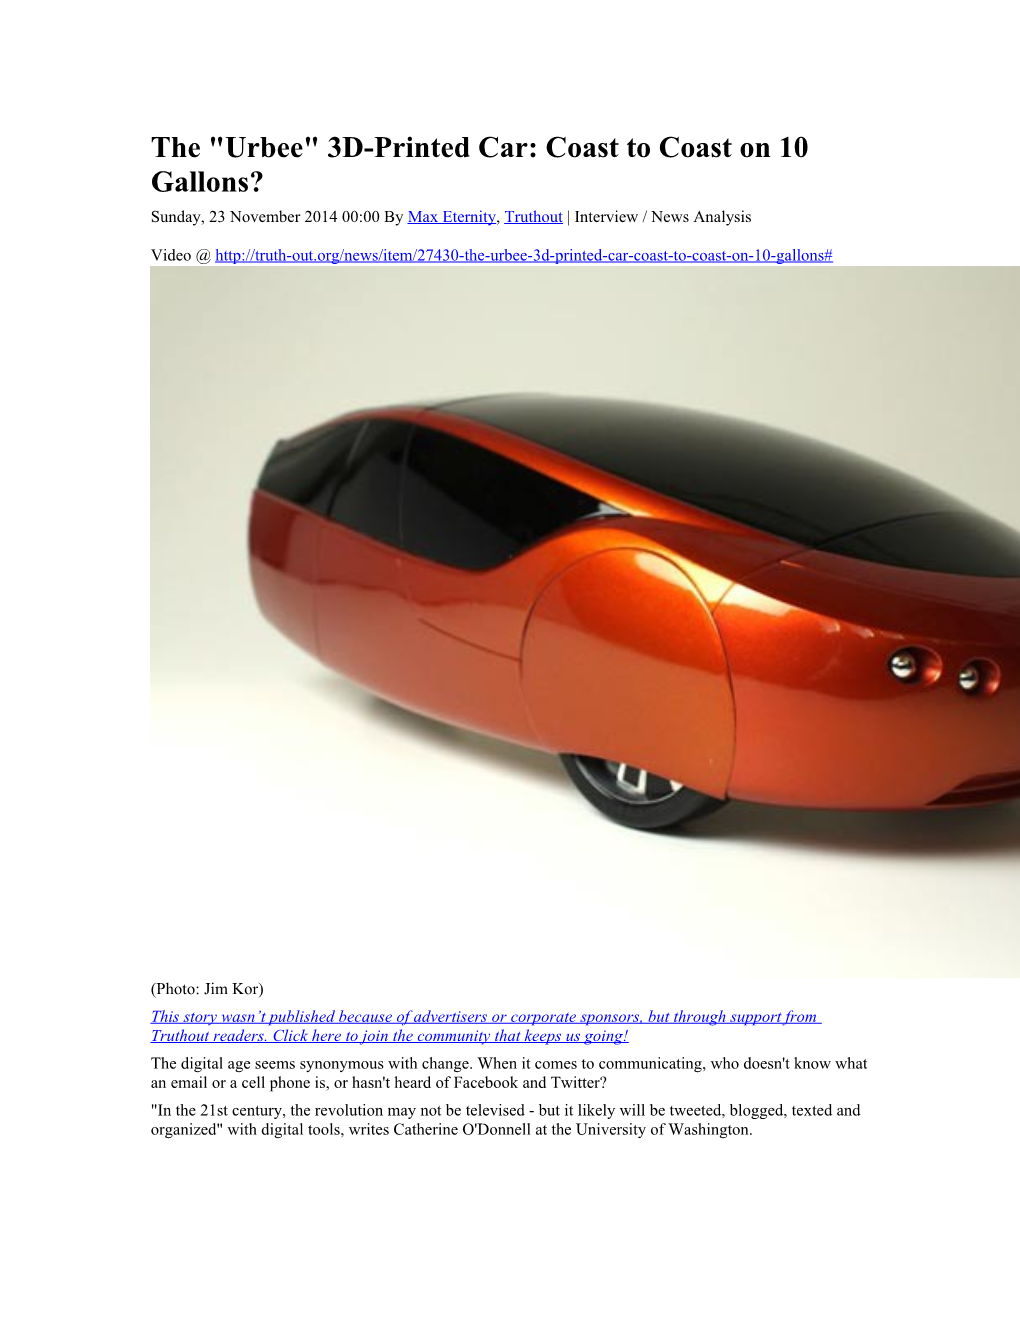 The Urbee 3D-Printed Car: Coast to Coast on 10 Gallons?